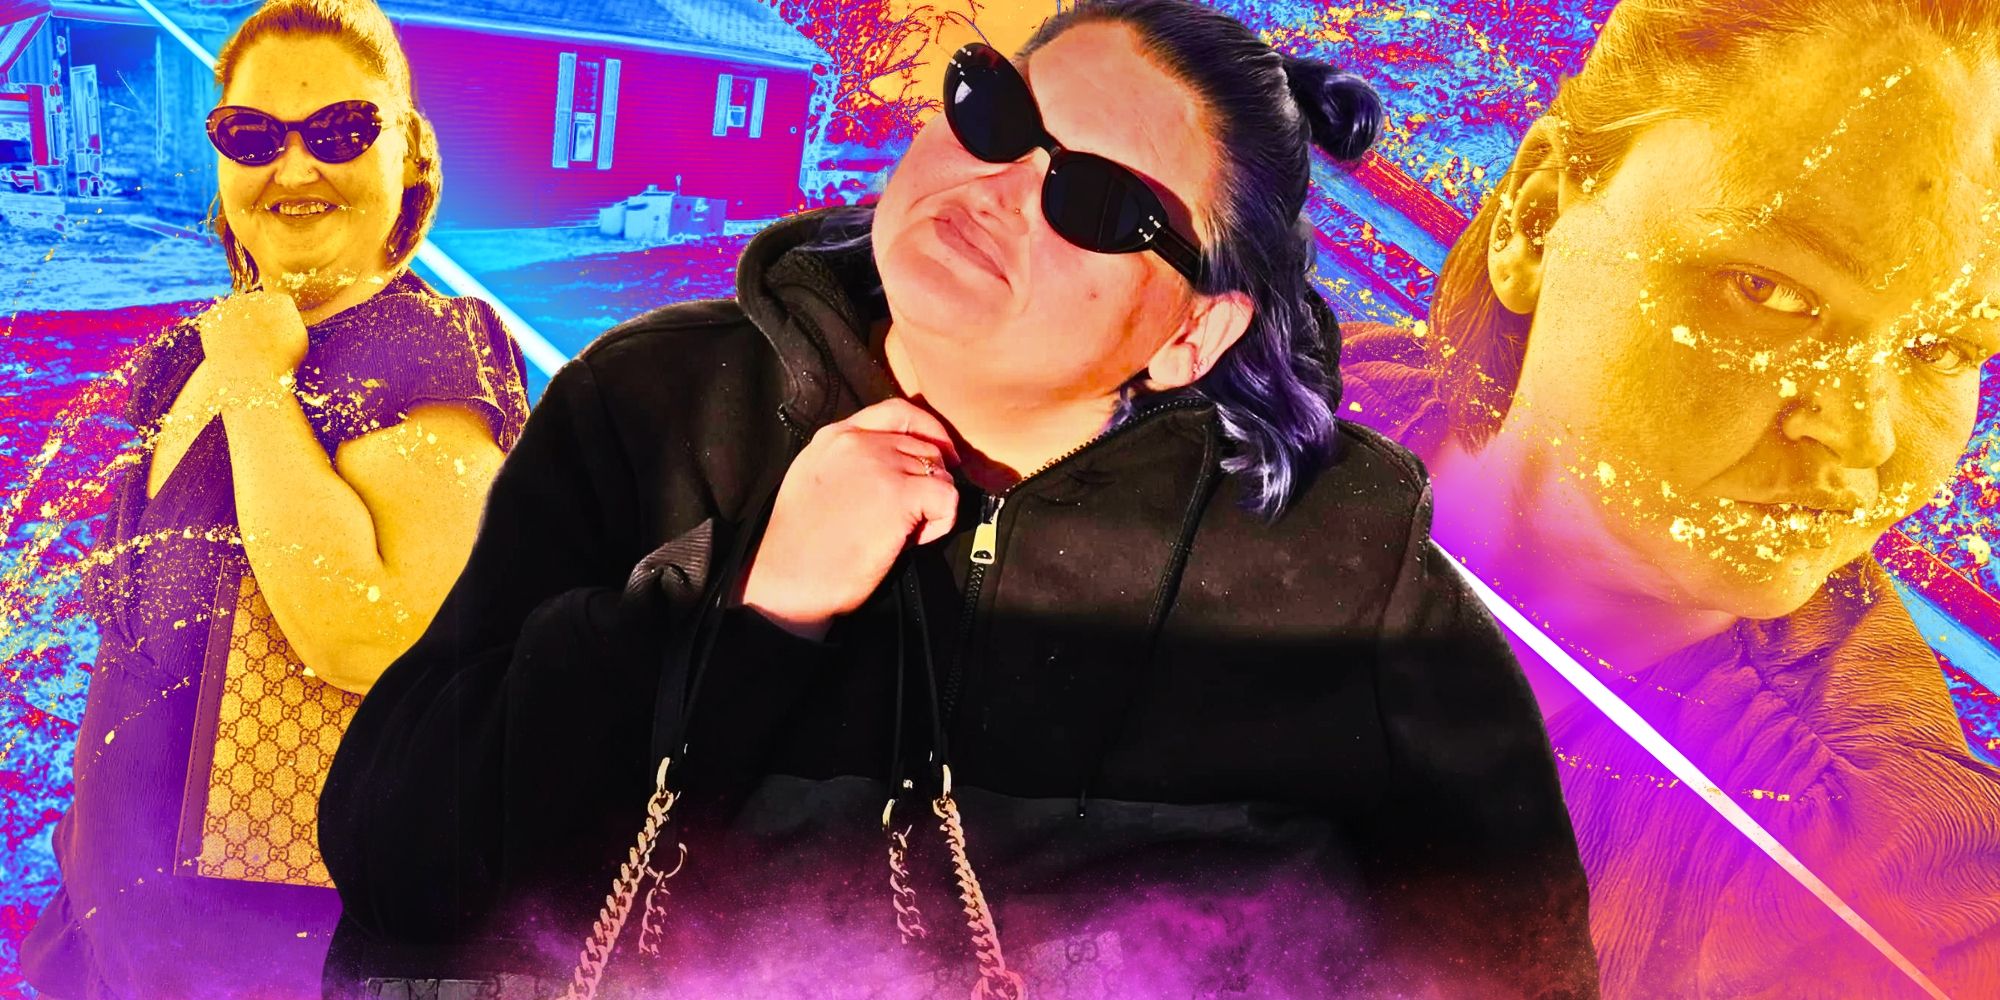 Montage of 1000-Lb Sisters’ Amy Slaton, wearing black outfit and sunglasses